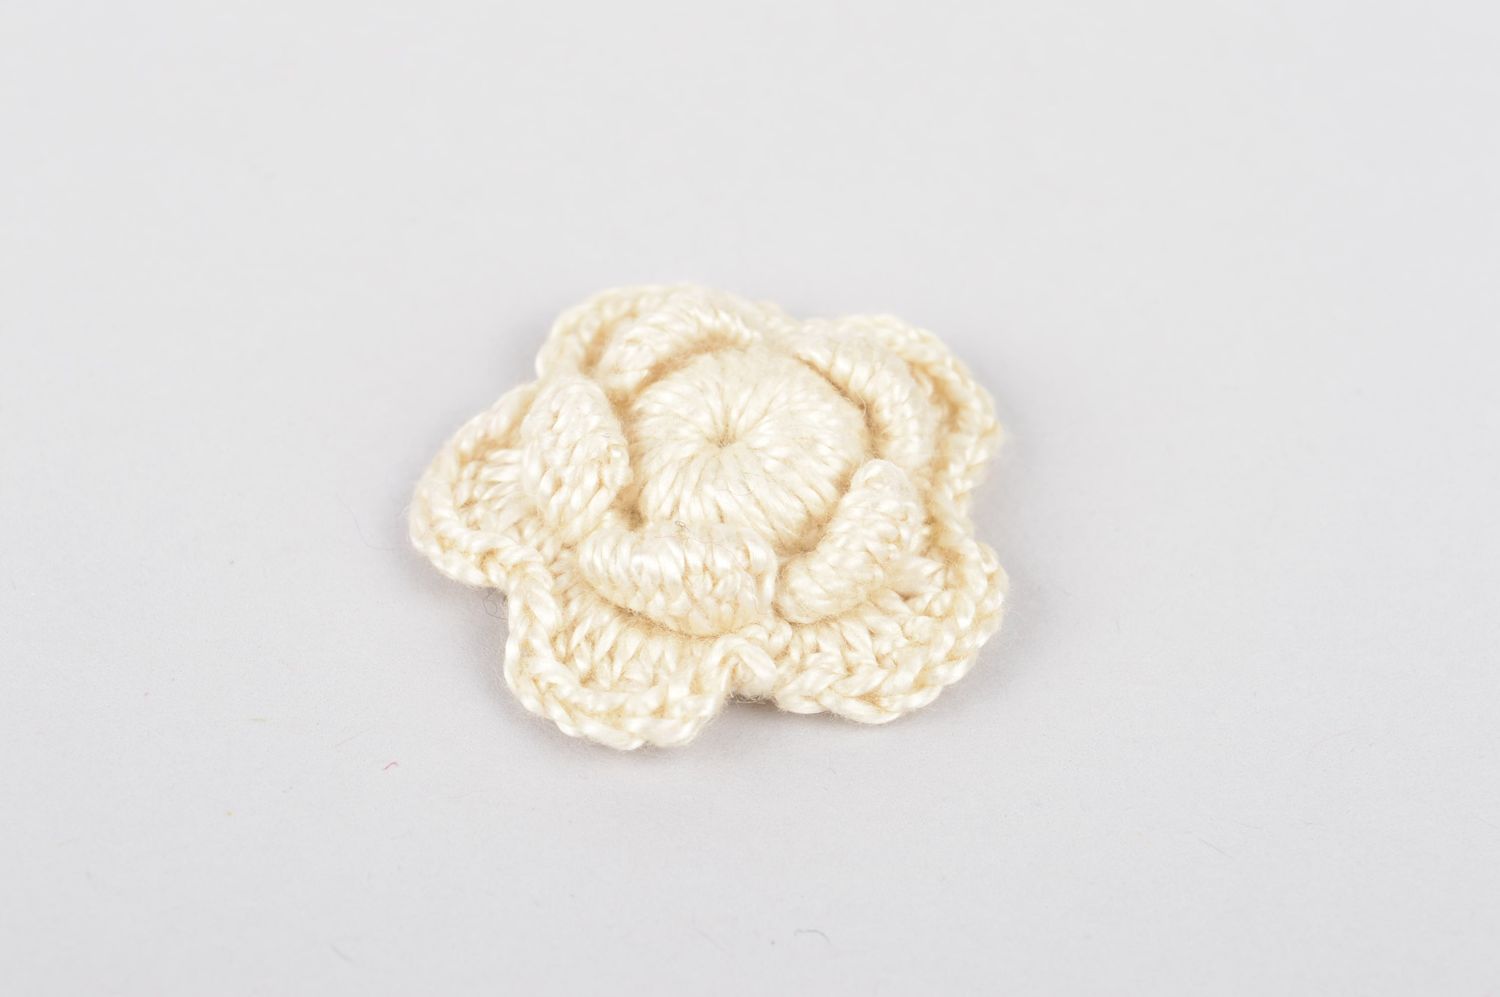 Handmade fittings for jewelry stylish blank for brooch unusual flower photo 2